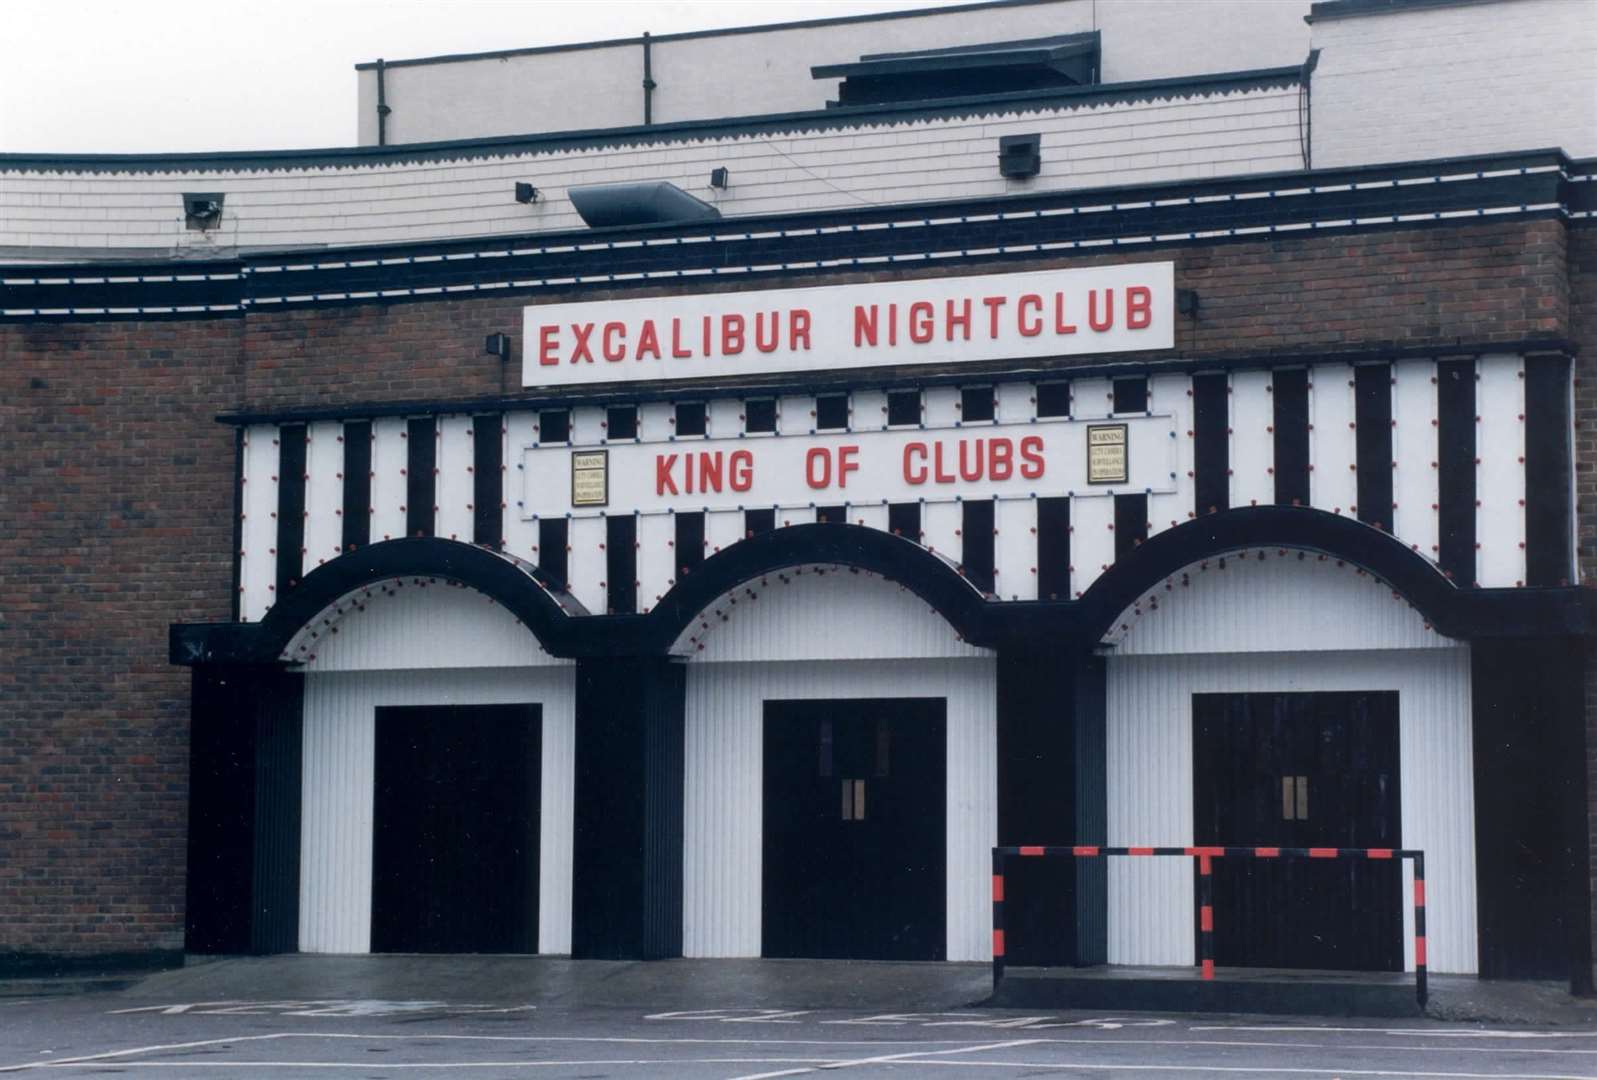 Excalibur Nightclub in Gillingham in 1997. The Brompton Road site is now making way for a potential development which would see 57 flats built across a four- and five-storey block.